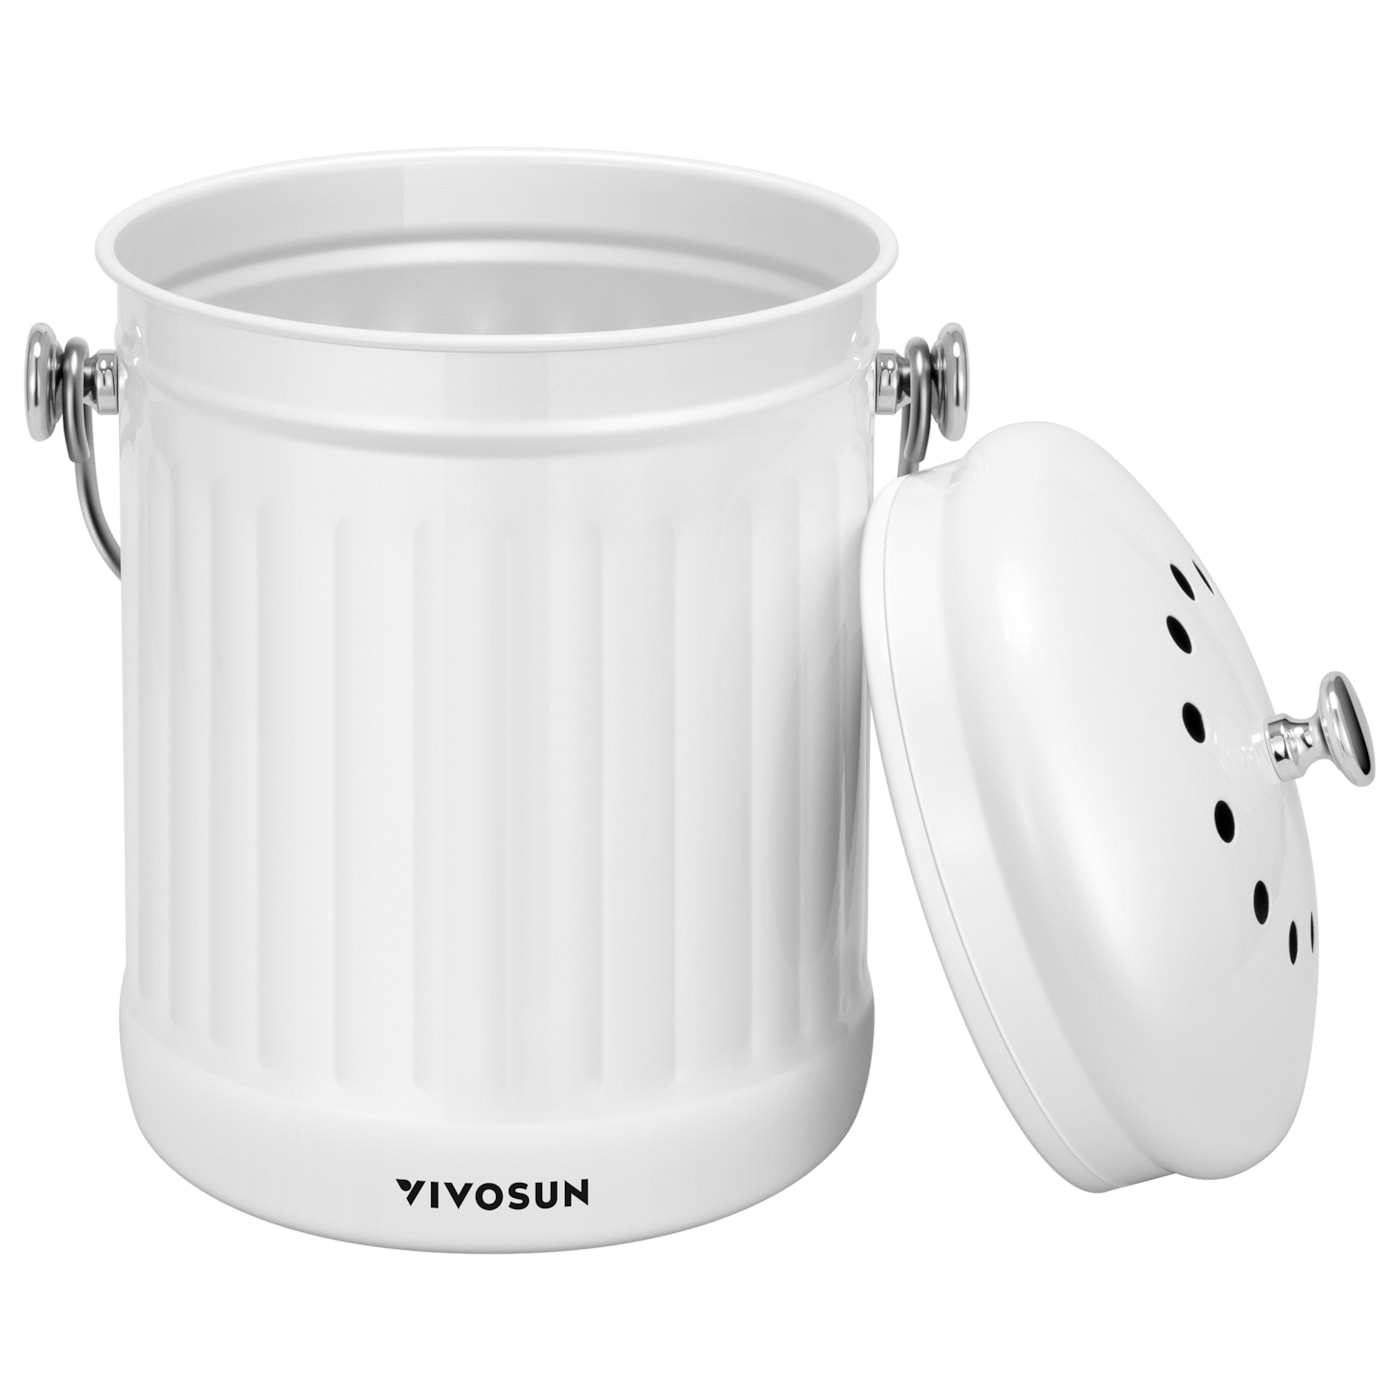 VIVOSUN 1.3 Gallon Compost Bucket with Lid, 2 Charcoal Filter Included, White